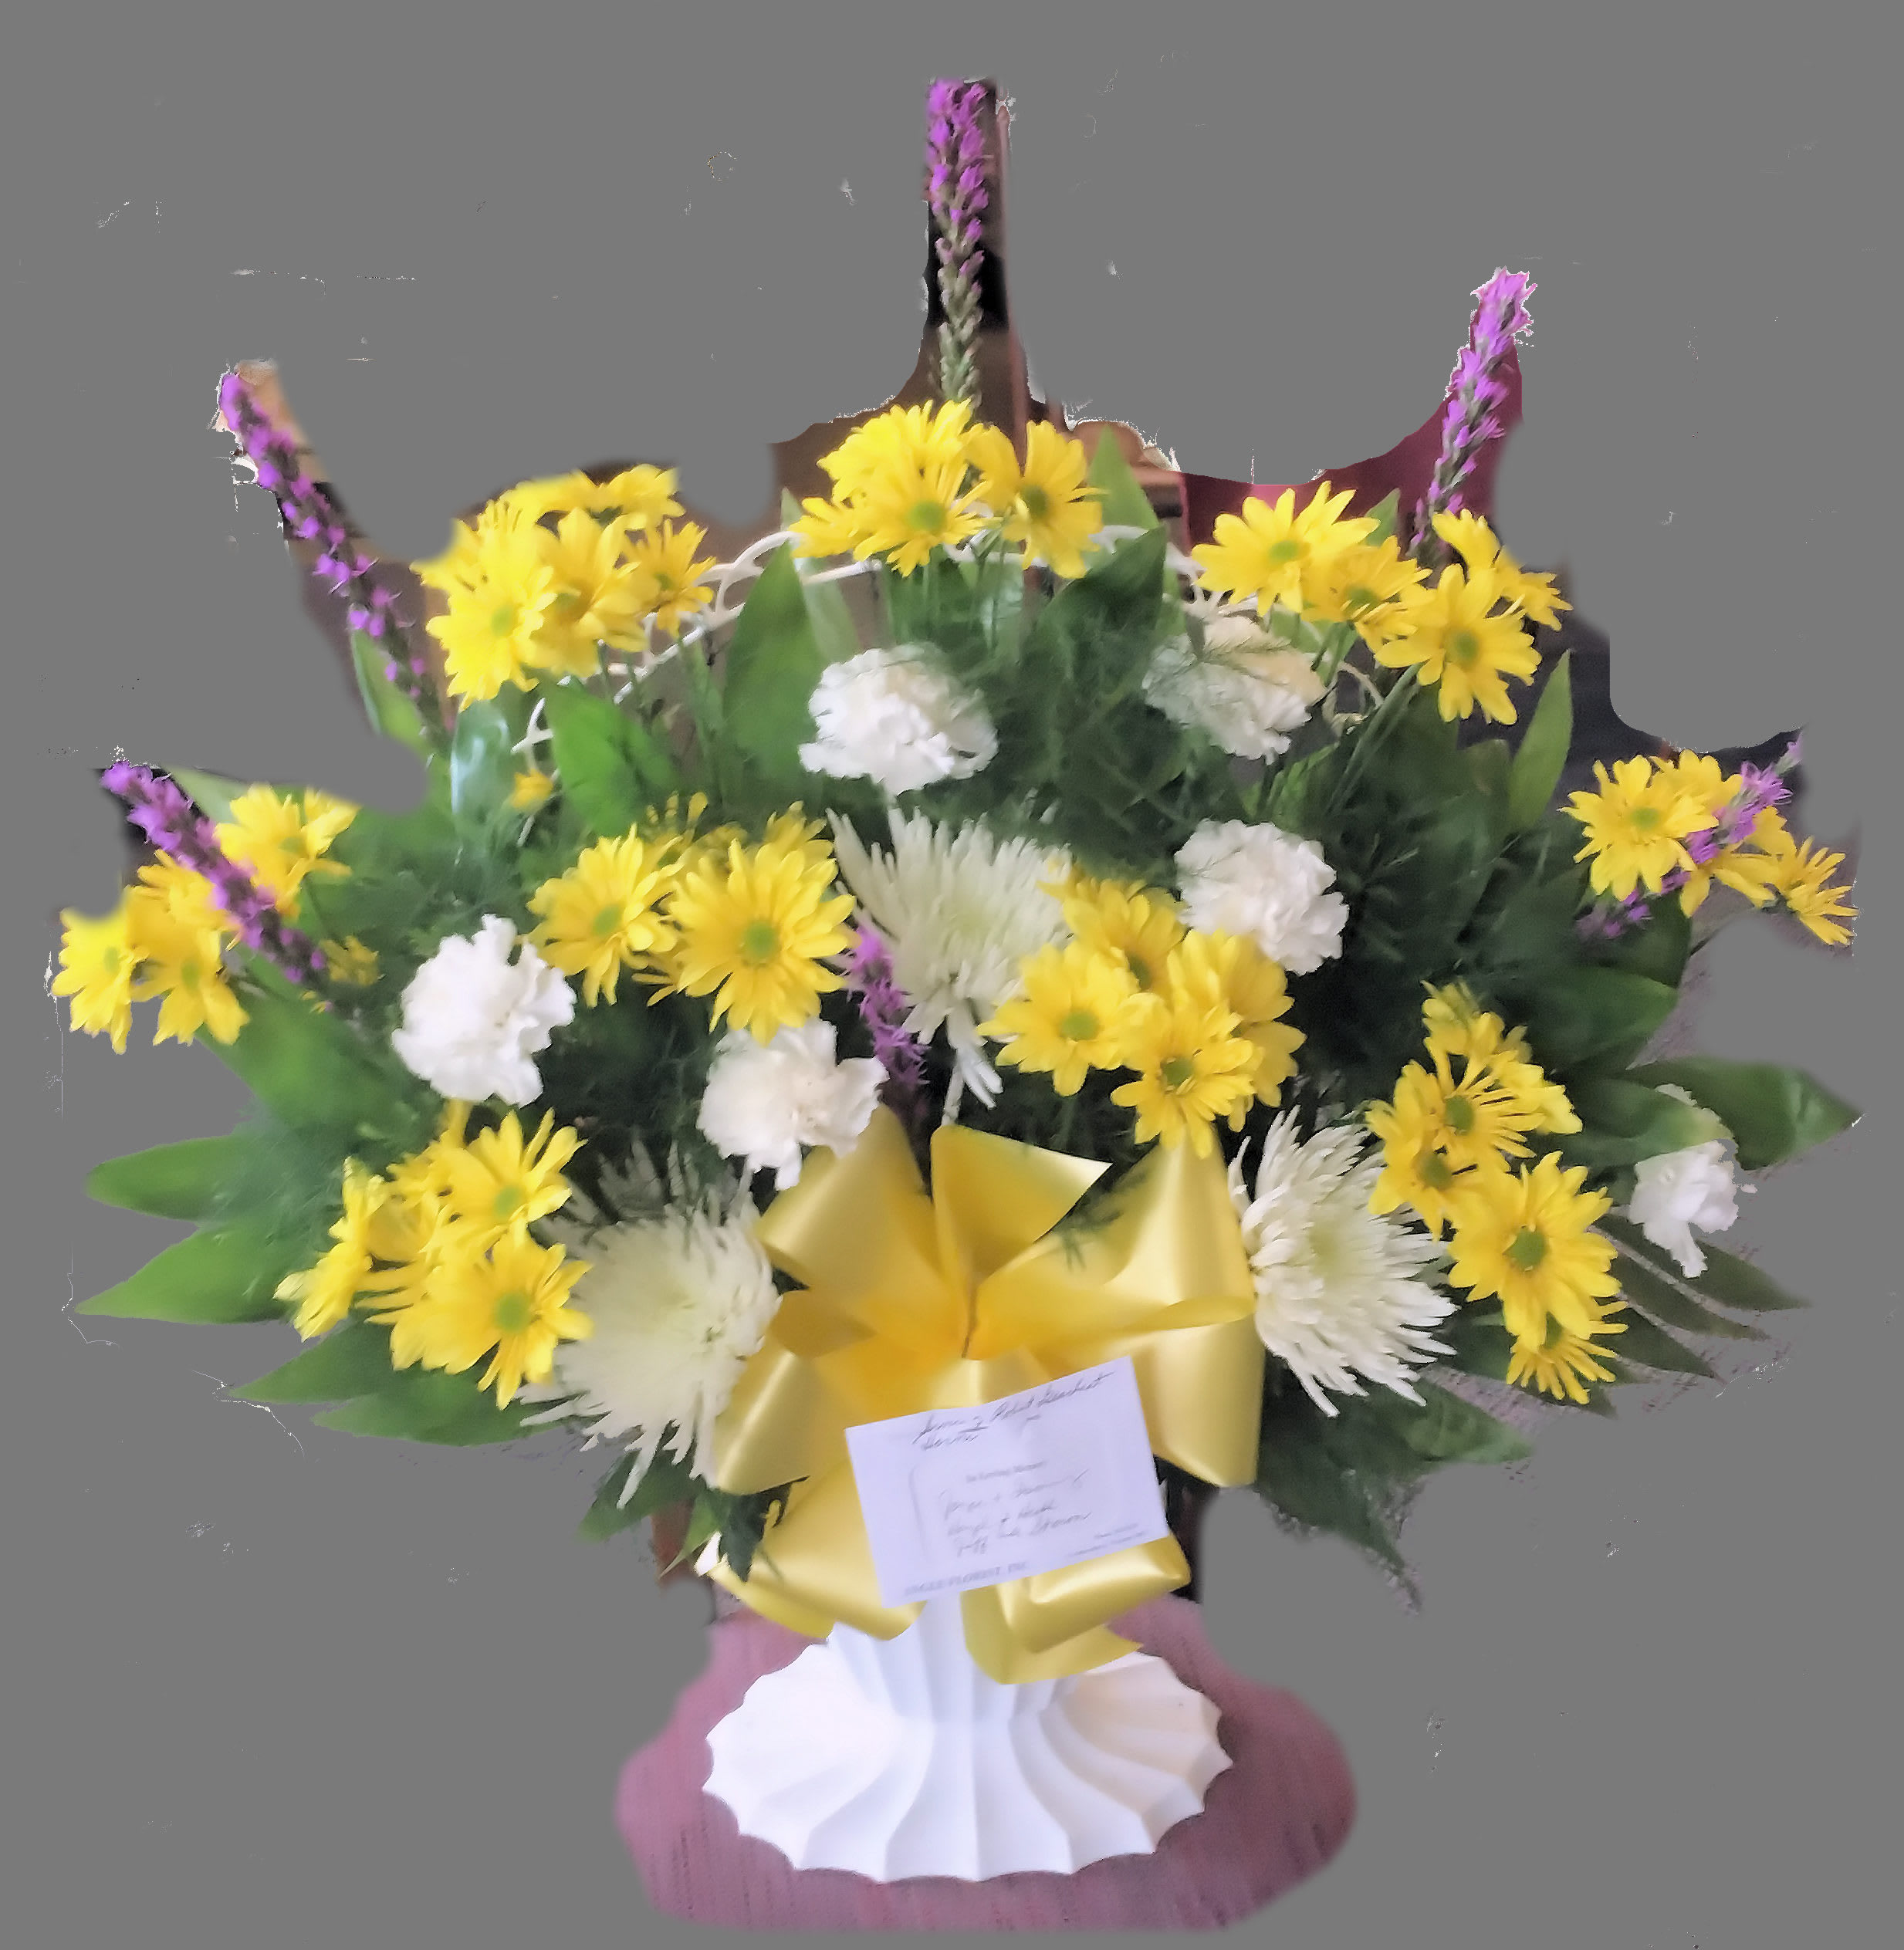 Deluxe Basket of Fresh Summer Blossoms  - A beautiful deluxe basket filled with a variety of fresh summer flowers including purple liatris, yellow daisies, white spider mums, and white carnations.